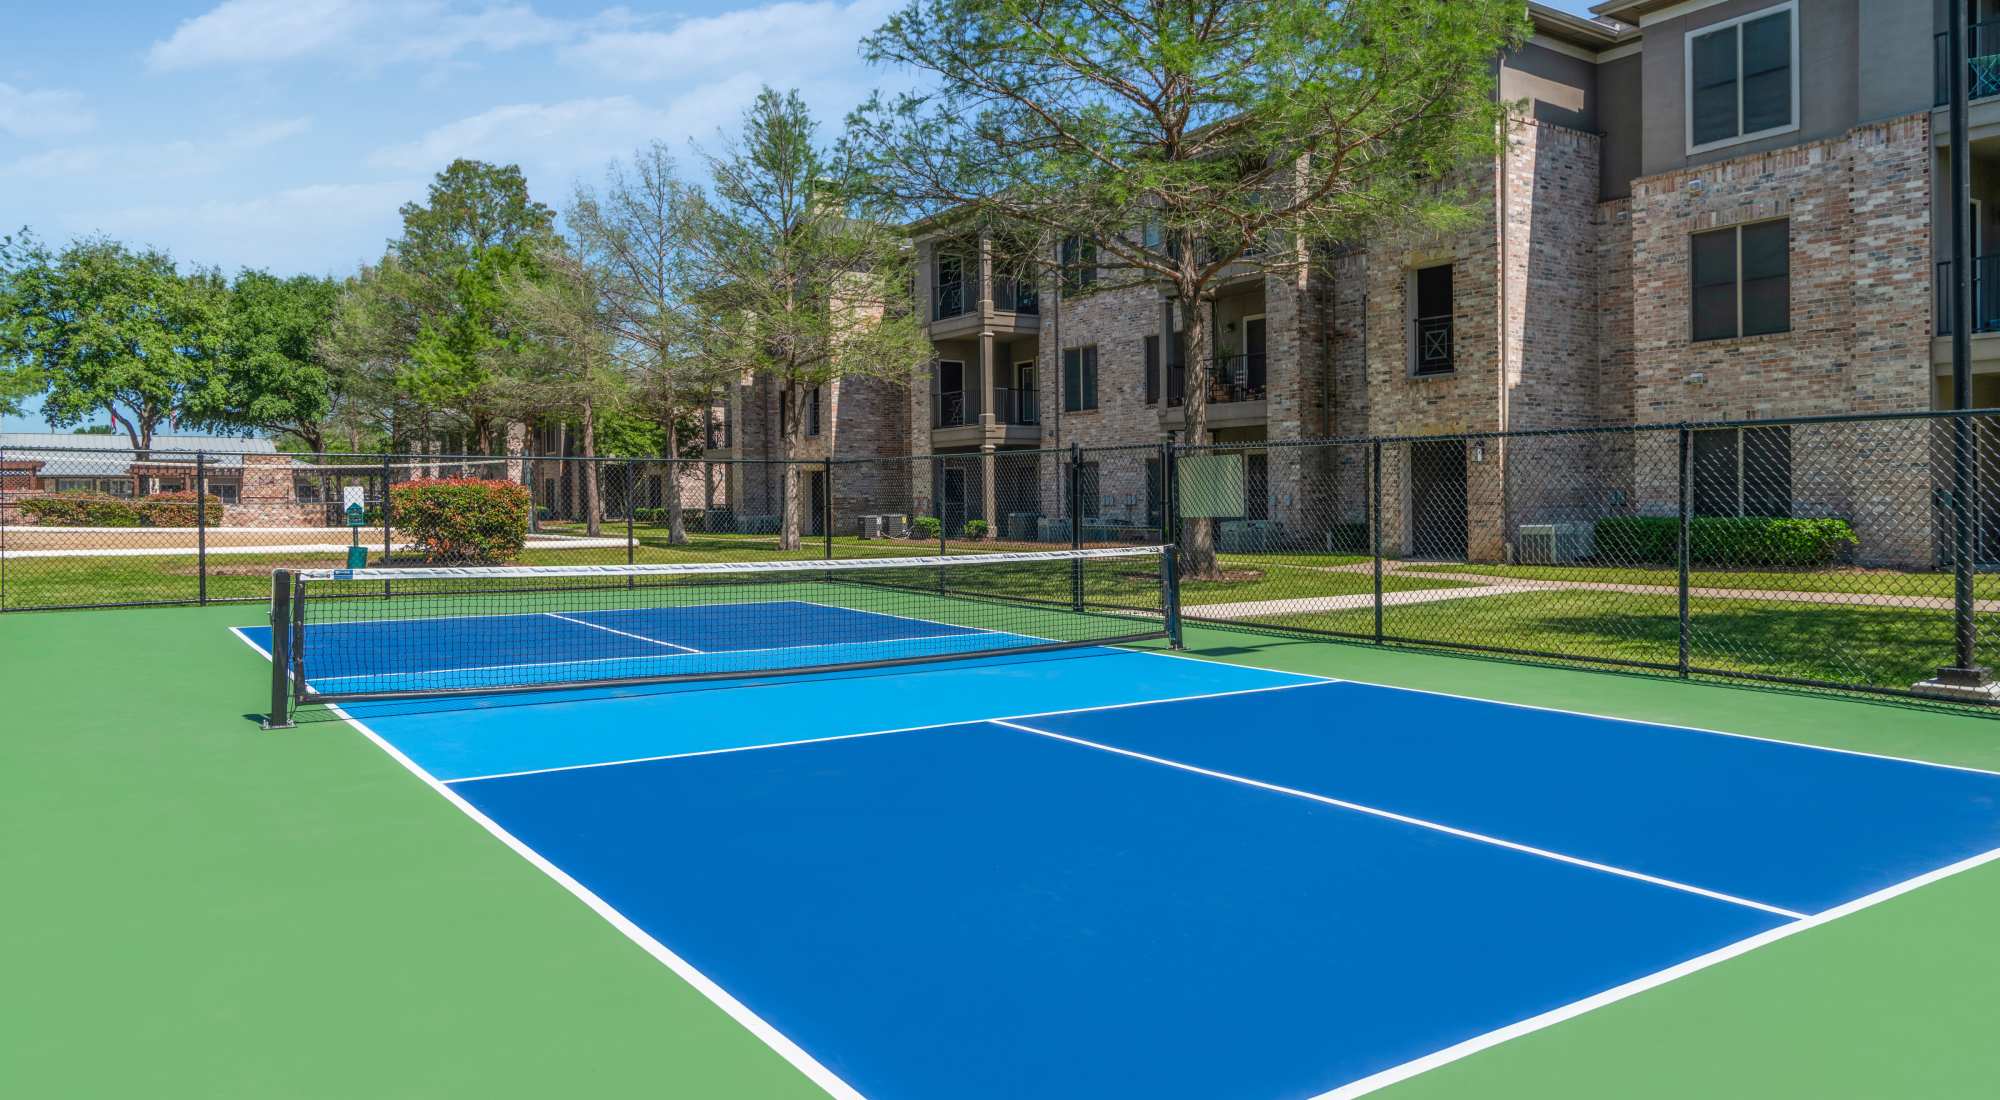 Lighted pickleball court at The Springs of Indian Creek